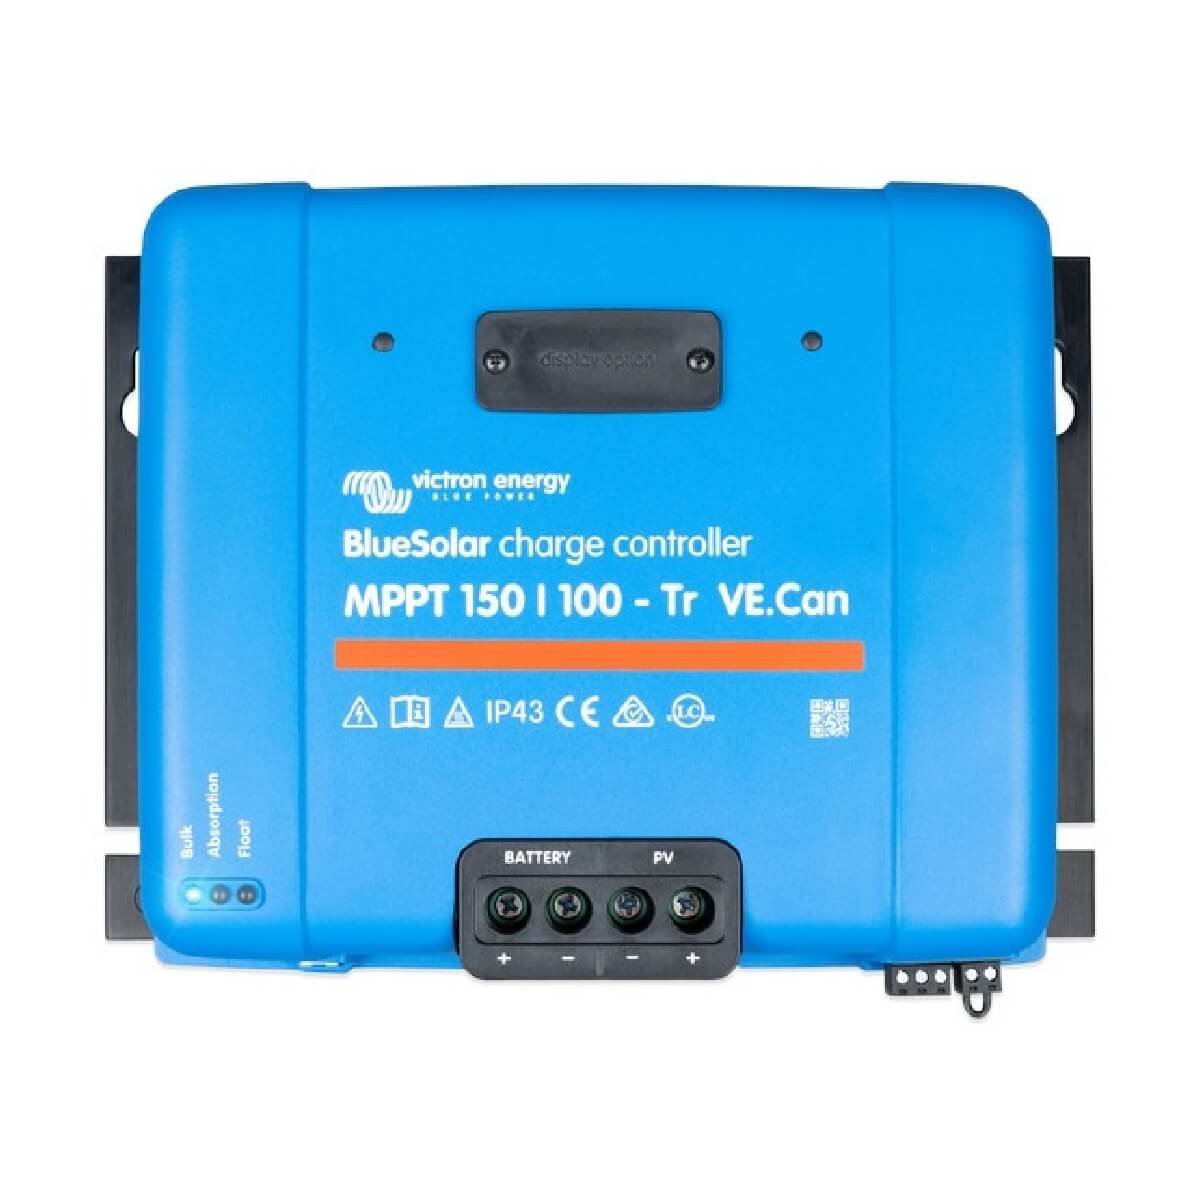 A Victron MPPT 150/100 - BlueSolar Charge Controller - Tr VE.Can with various ports and labels.